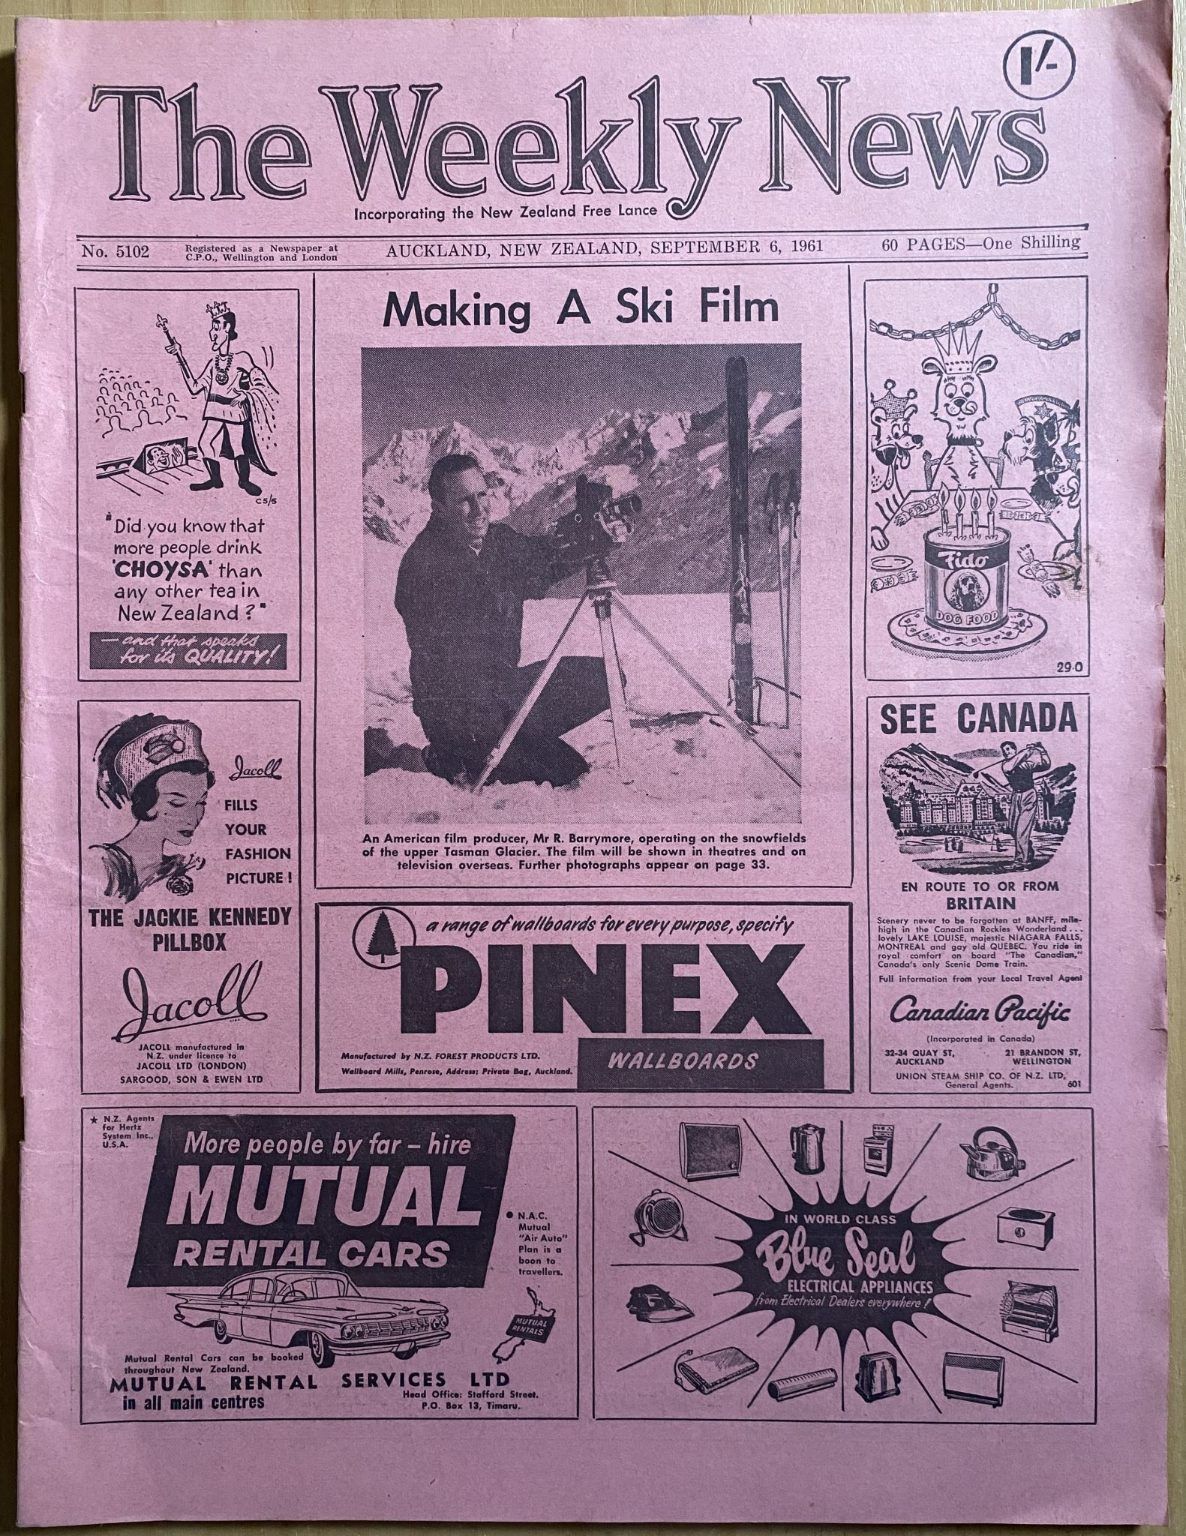 OLD NEWSPAPER: The Weekly News, No. 5102, 6 September 1961